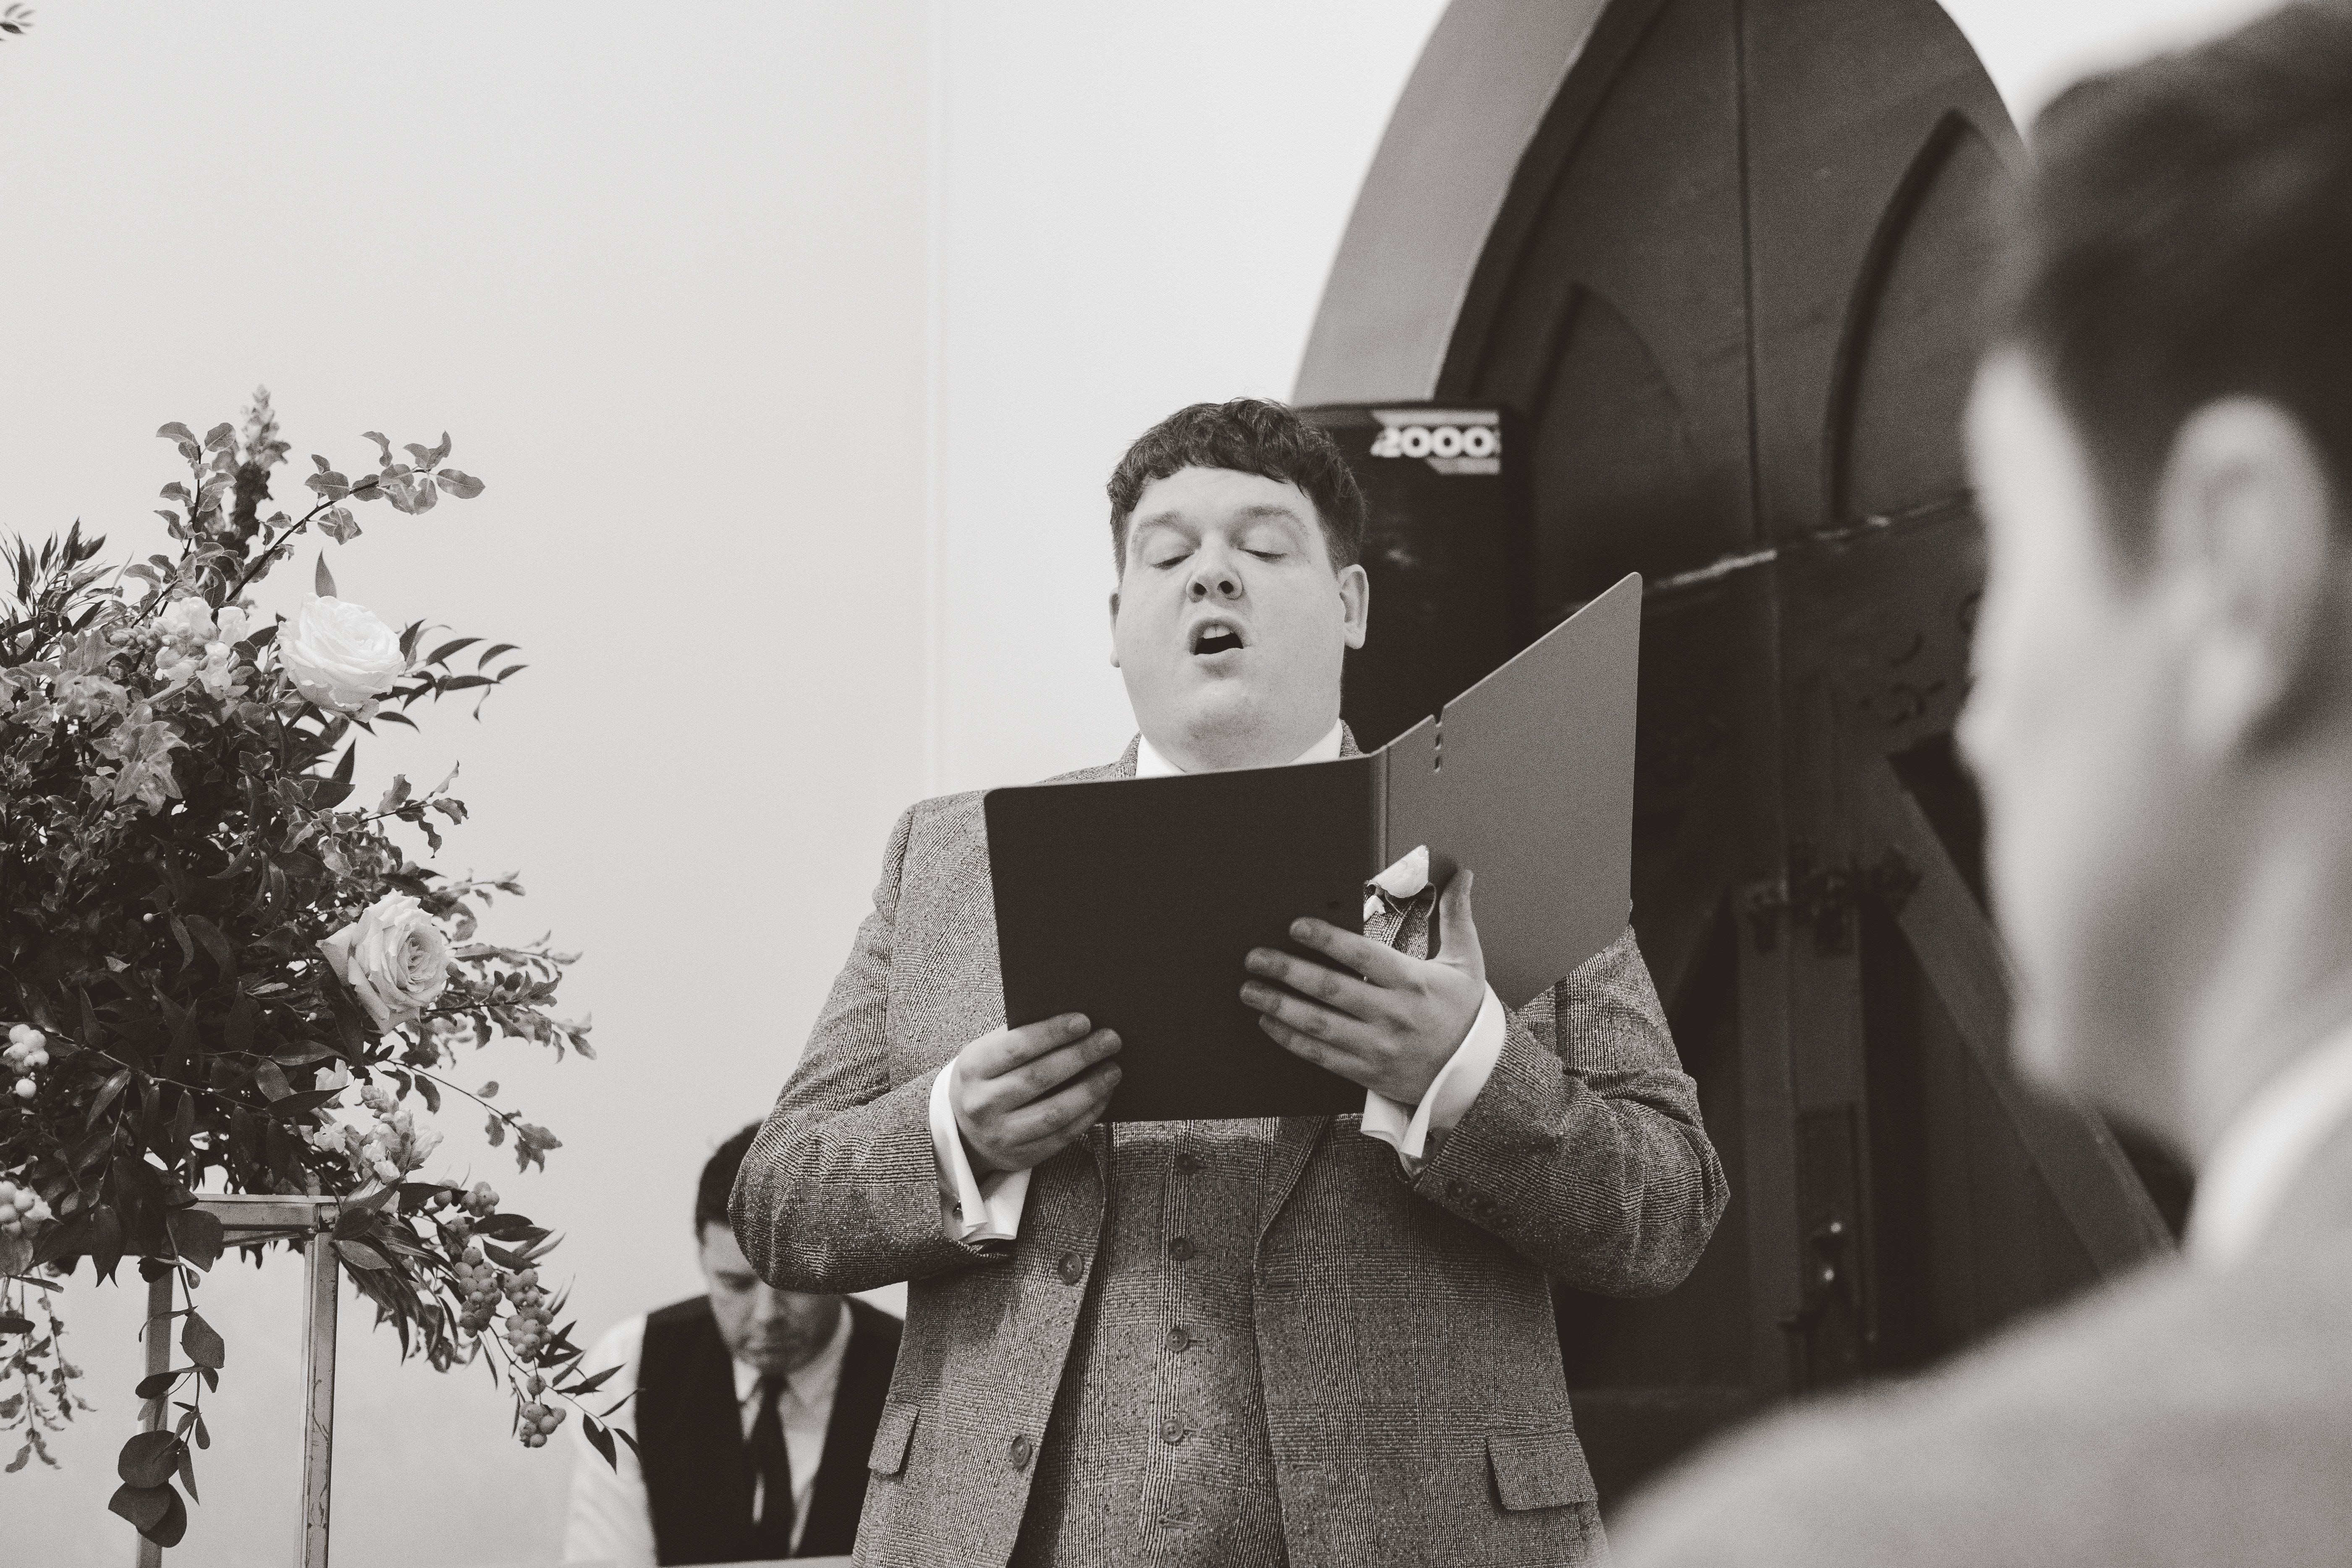 Picture of Chris in a suit with holding a choir sheet and singing at a wedding.